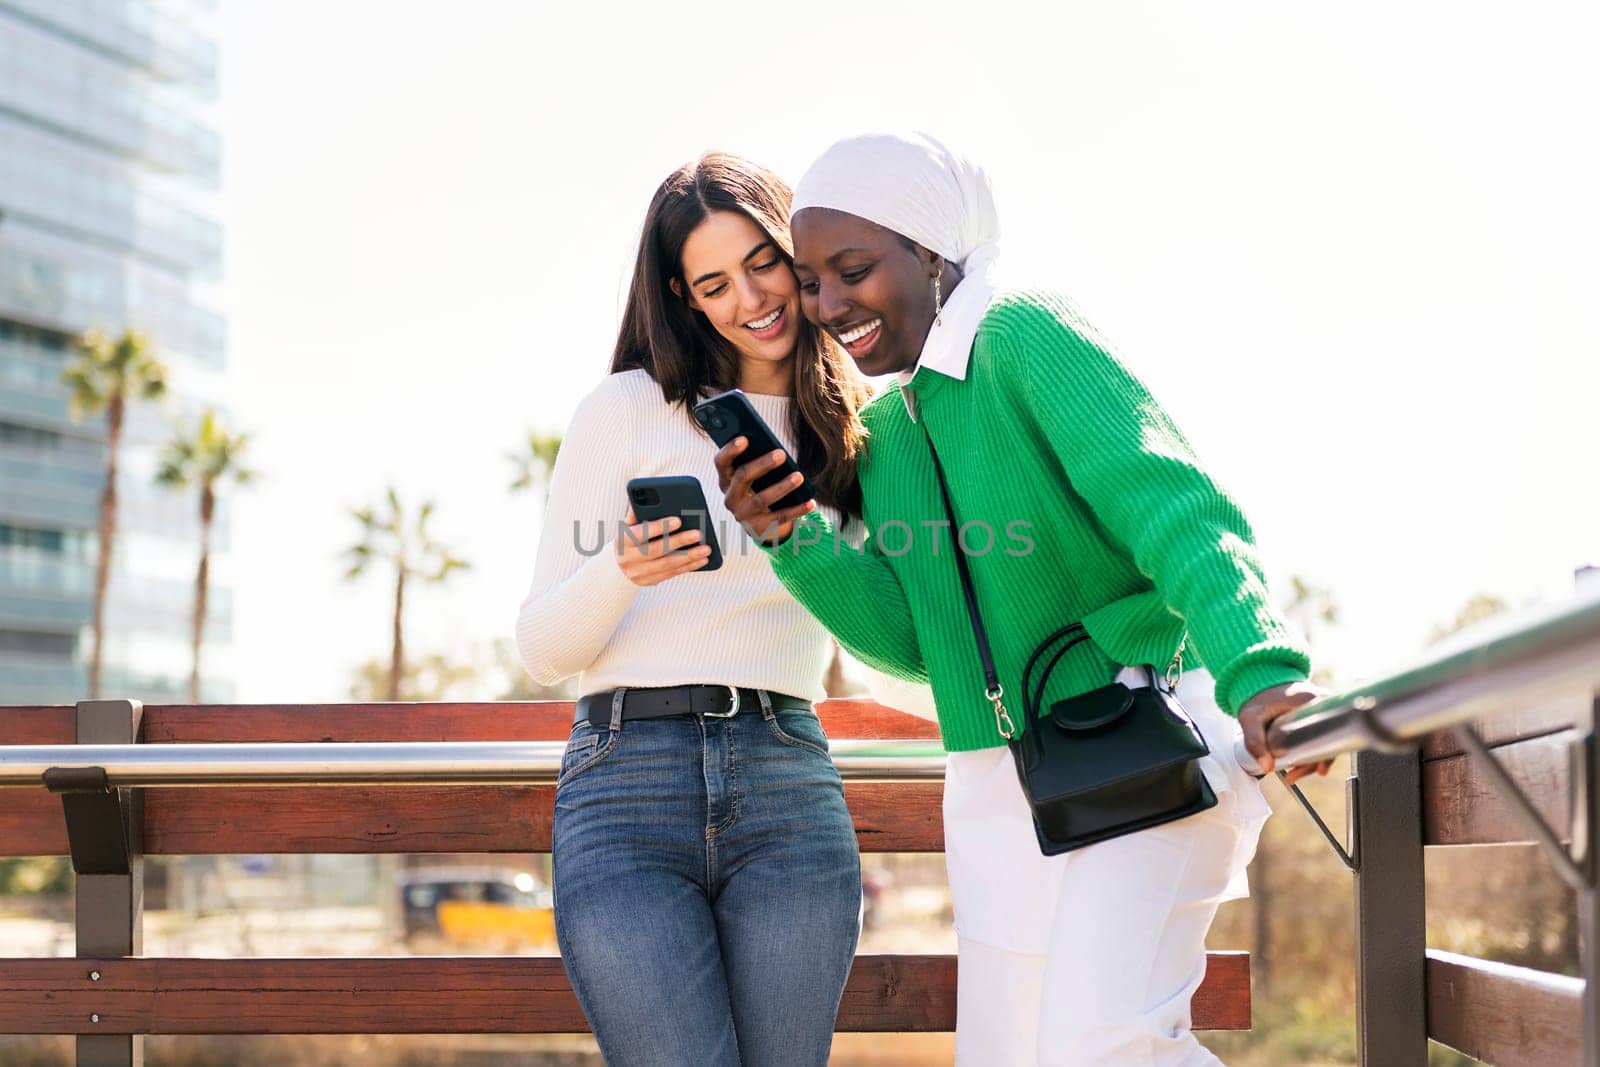 two young female friends smiling happy while having fun carefree looking at their mobile phones in a city park, concept of diversity and modern lifestyle, copy space for text